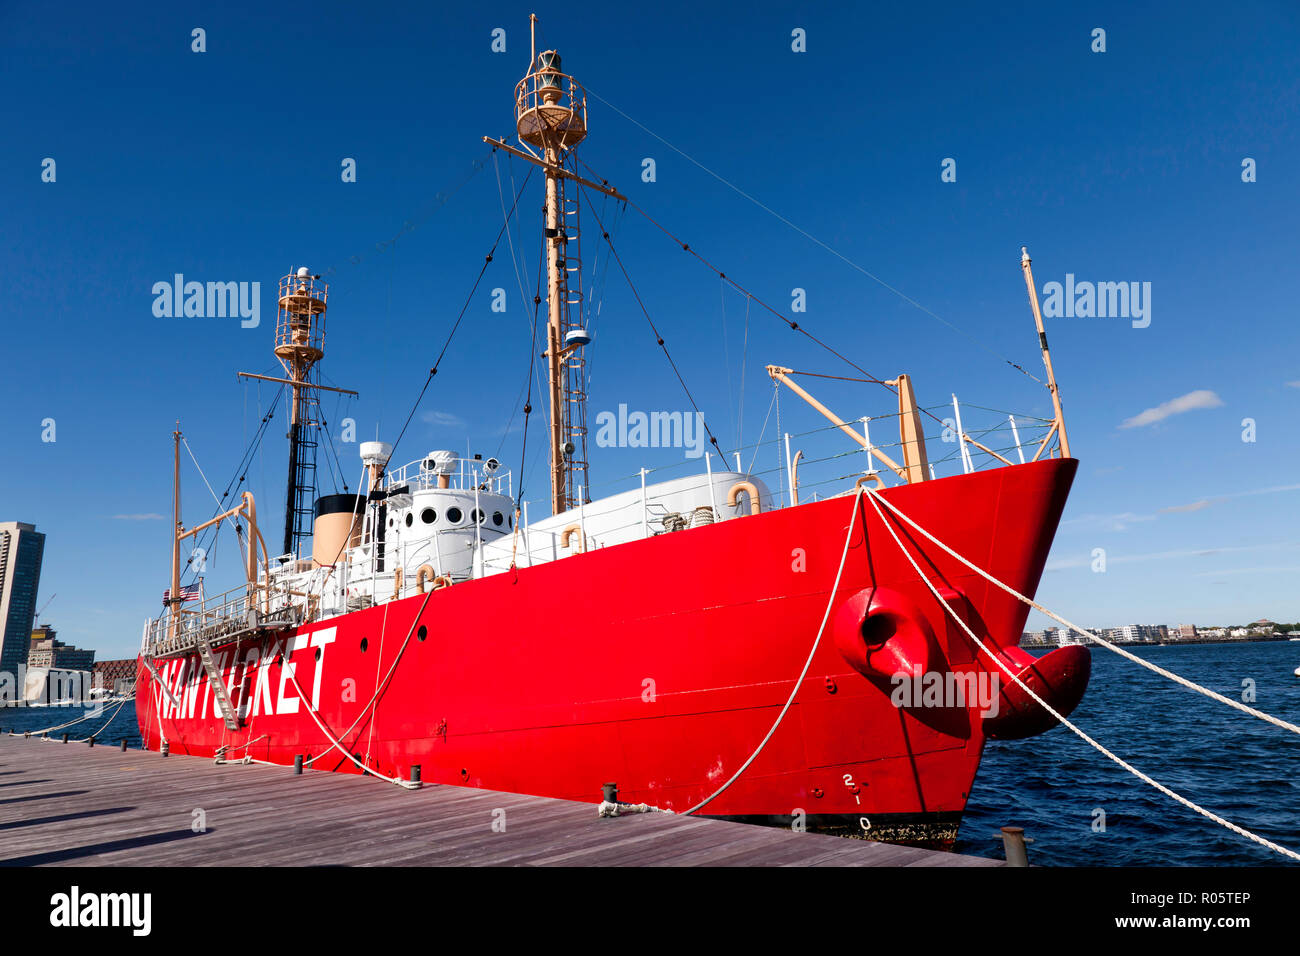 Wide-angle view of Lightship WLV-612 (Nantucket Lightship) moored in Boston Harbour Stock Photo